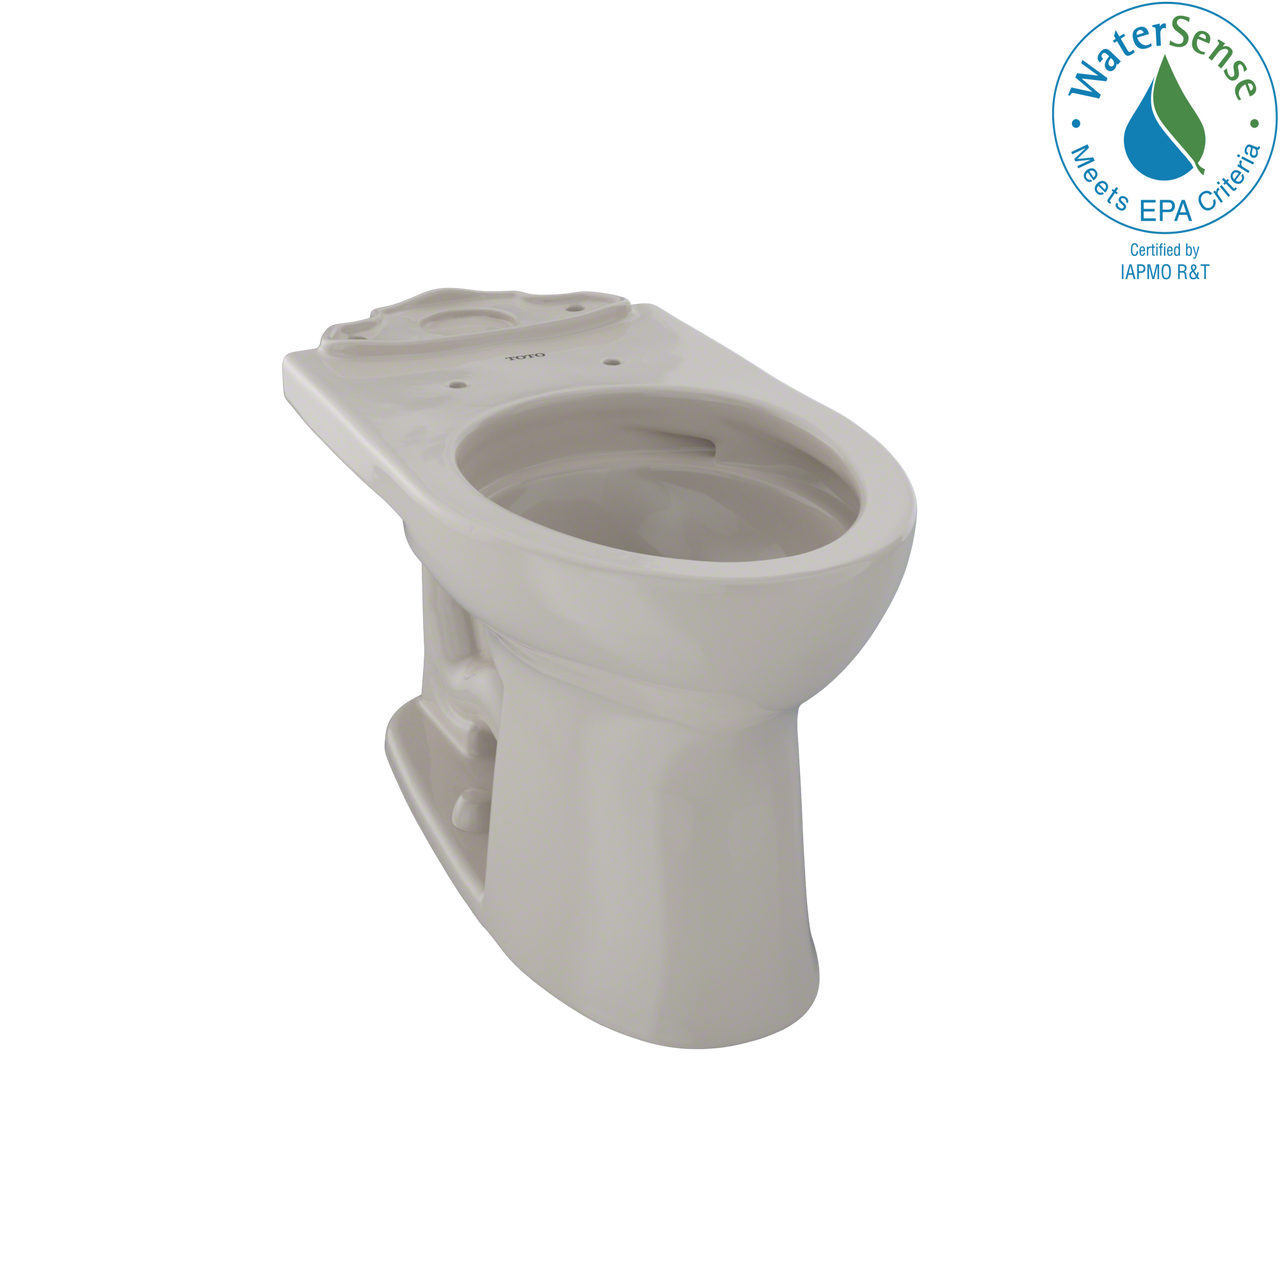 TOTO Drake II Universal Height Elongated Toilet Bowl with CeFiONtect,  - C454CUFG#03 - BNGBath